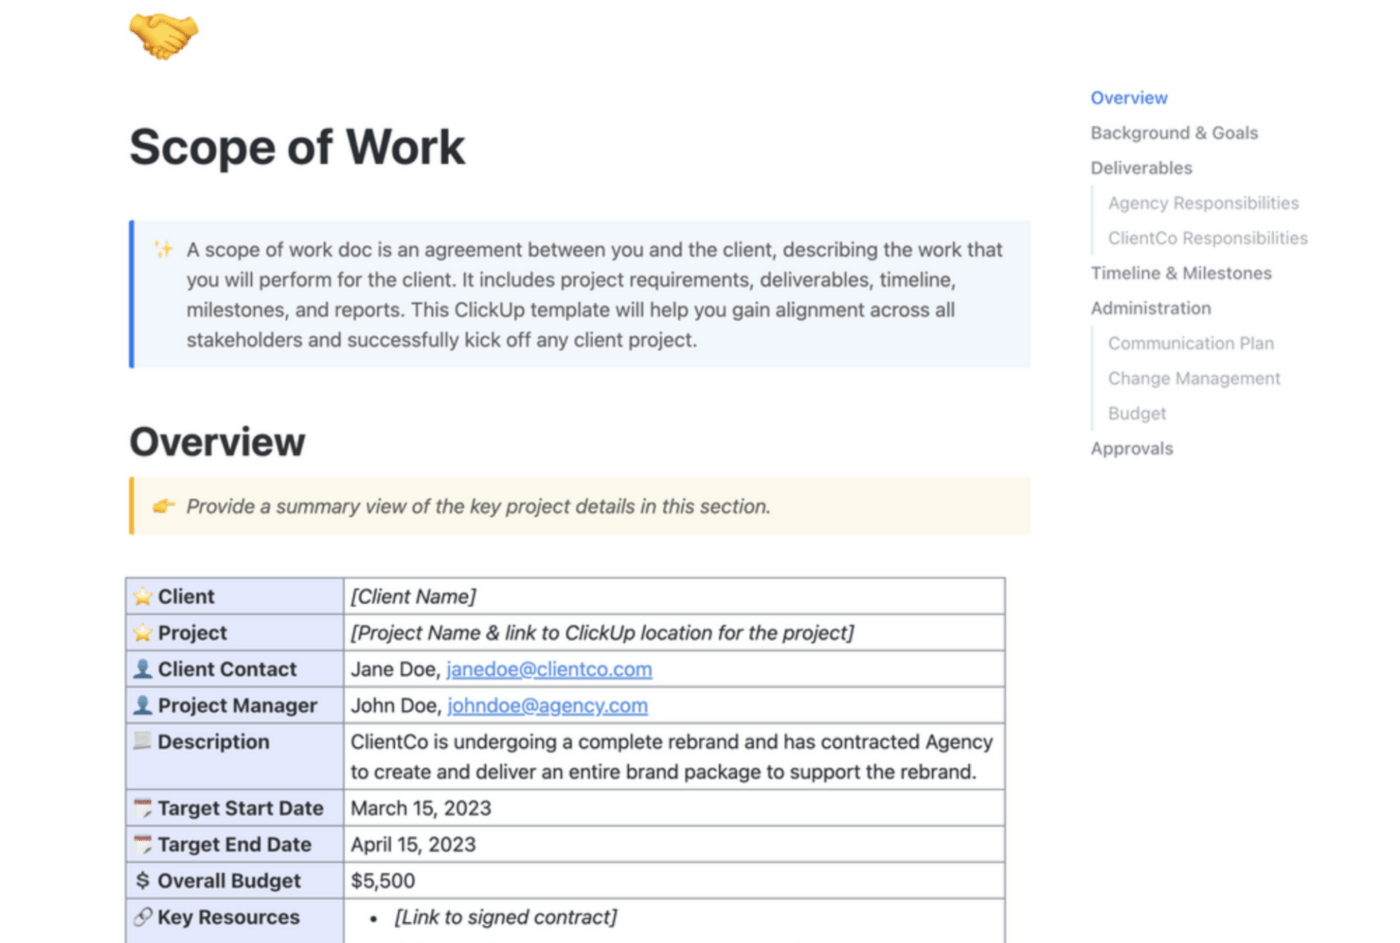 Scope of Work Doc Template by ClickUp